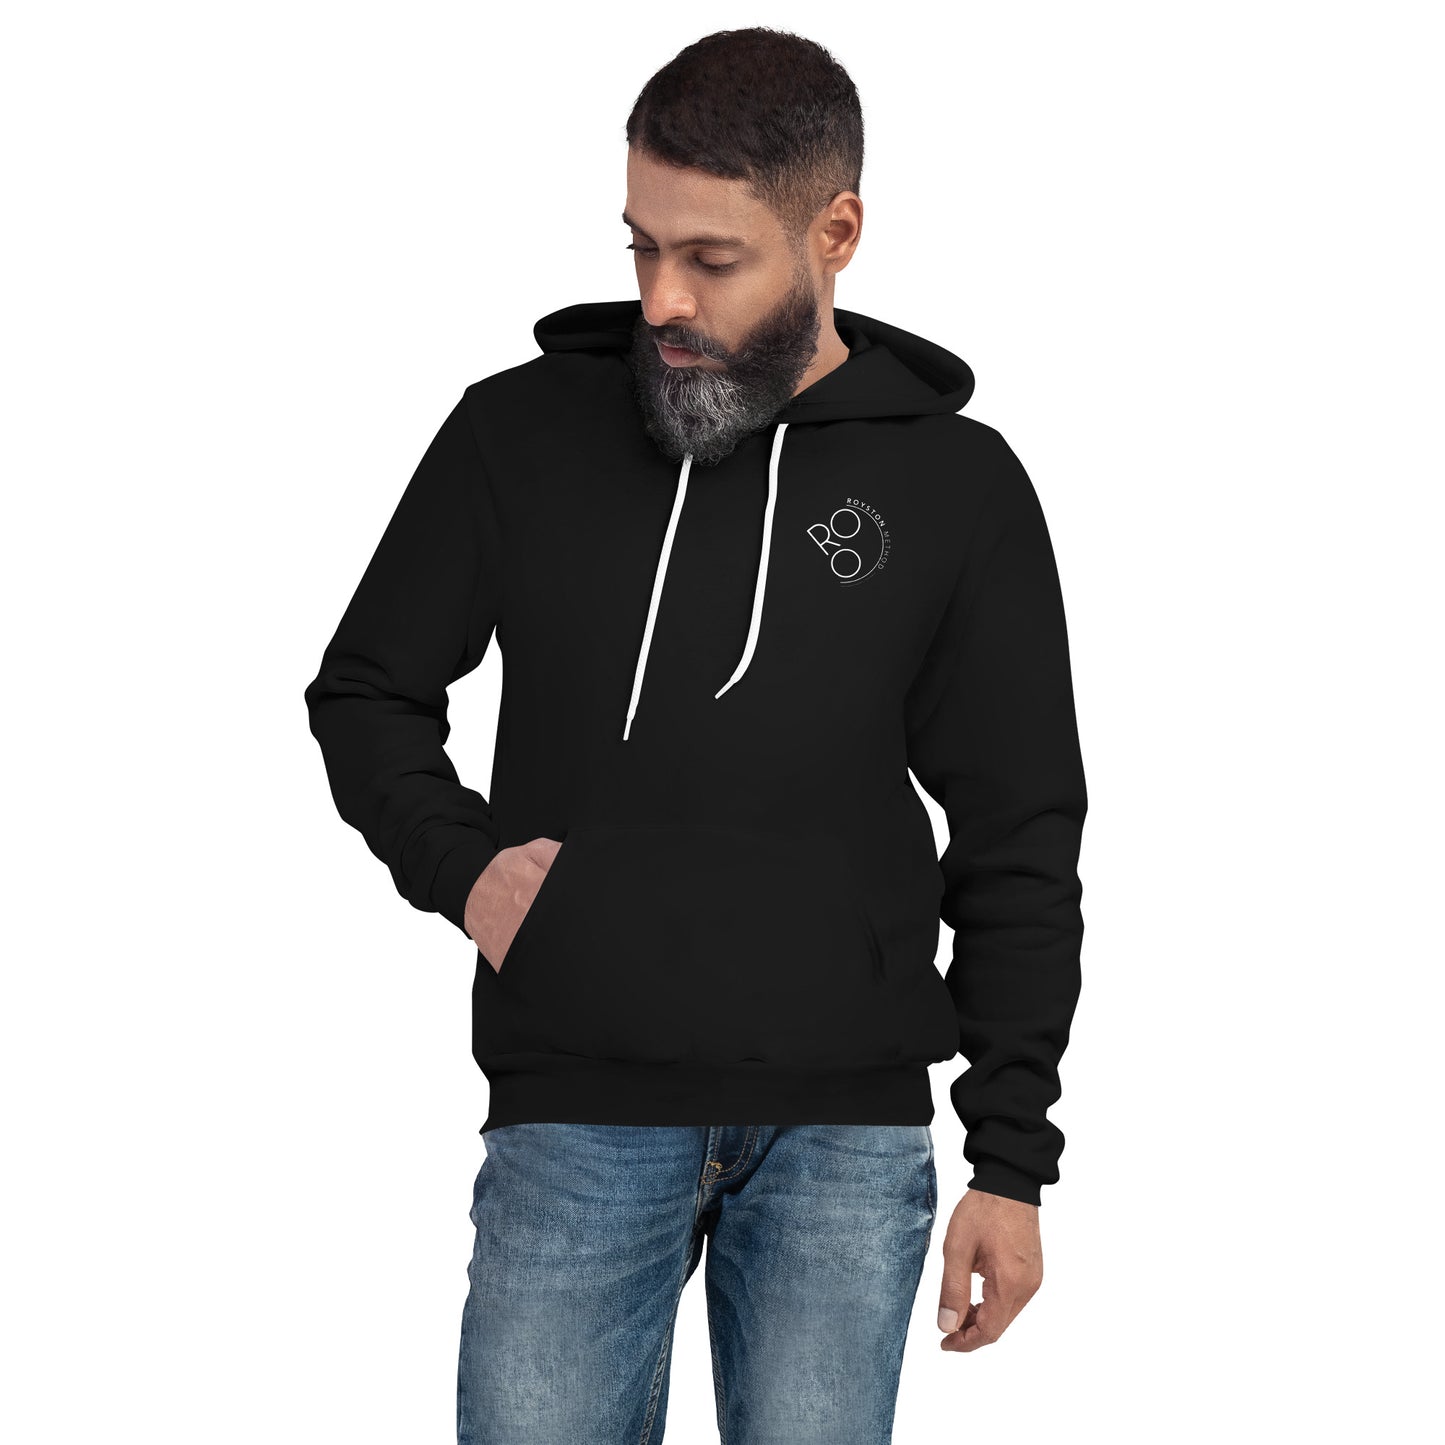 Fittest Over 50 Unisex hoodie